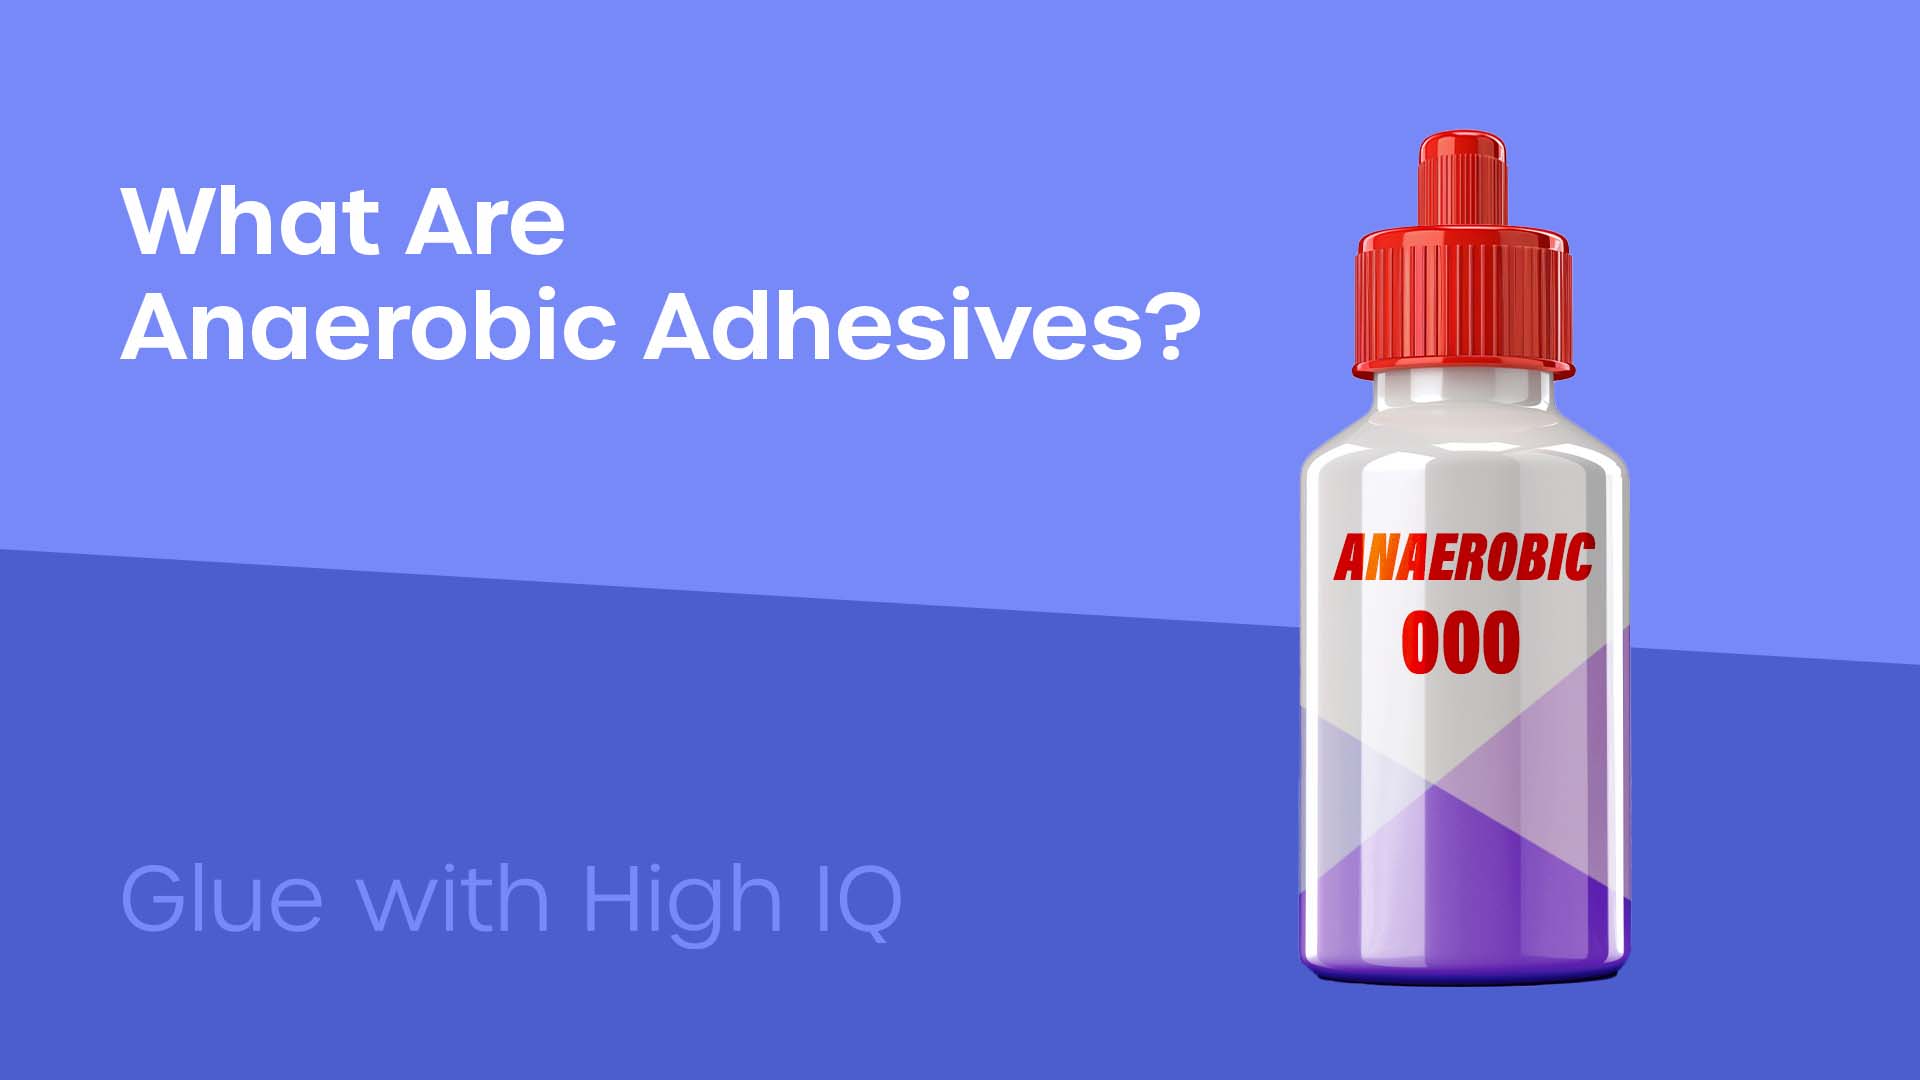 What is an anaerobic adhesive?